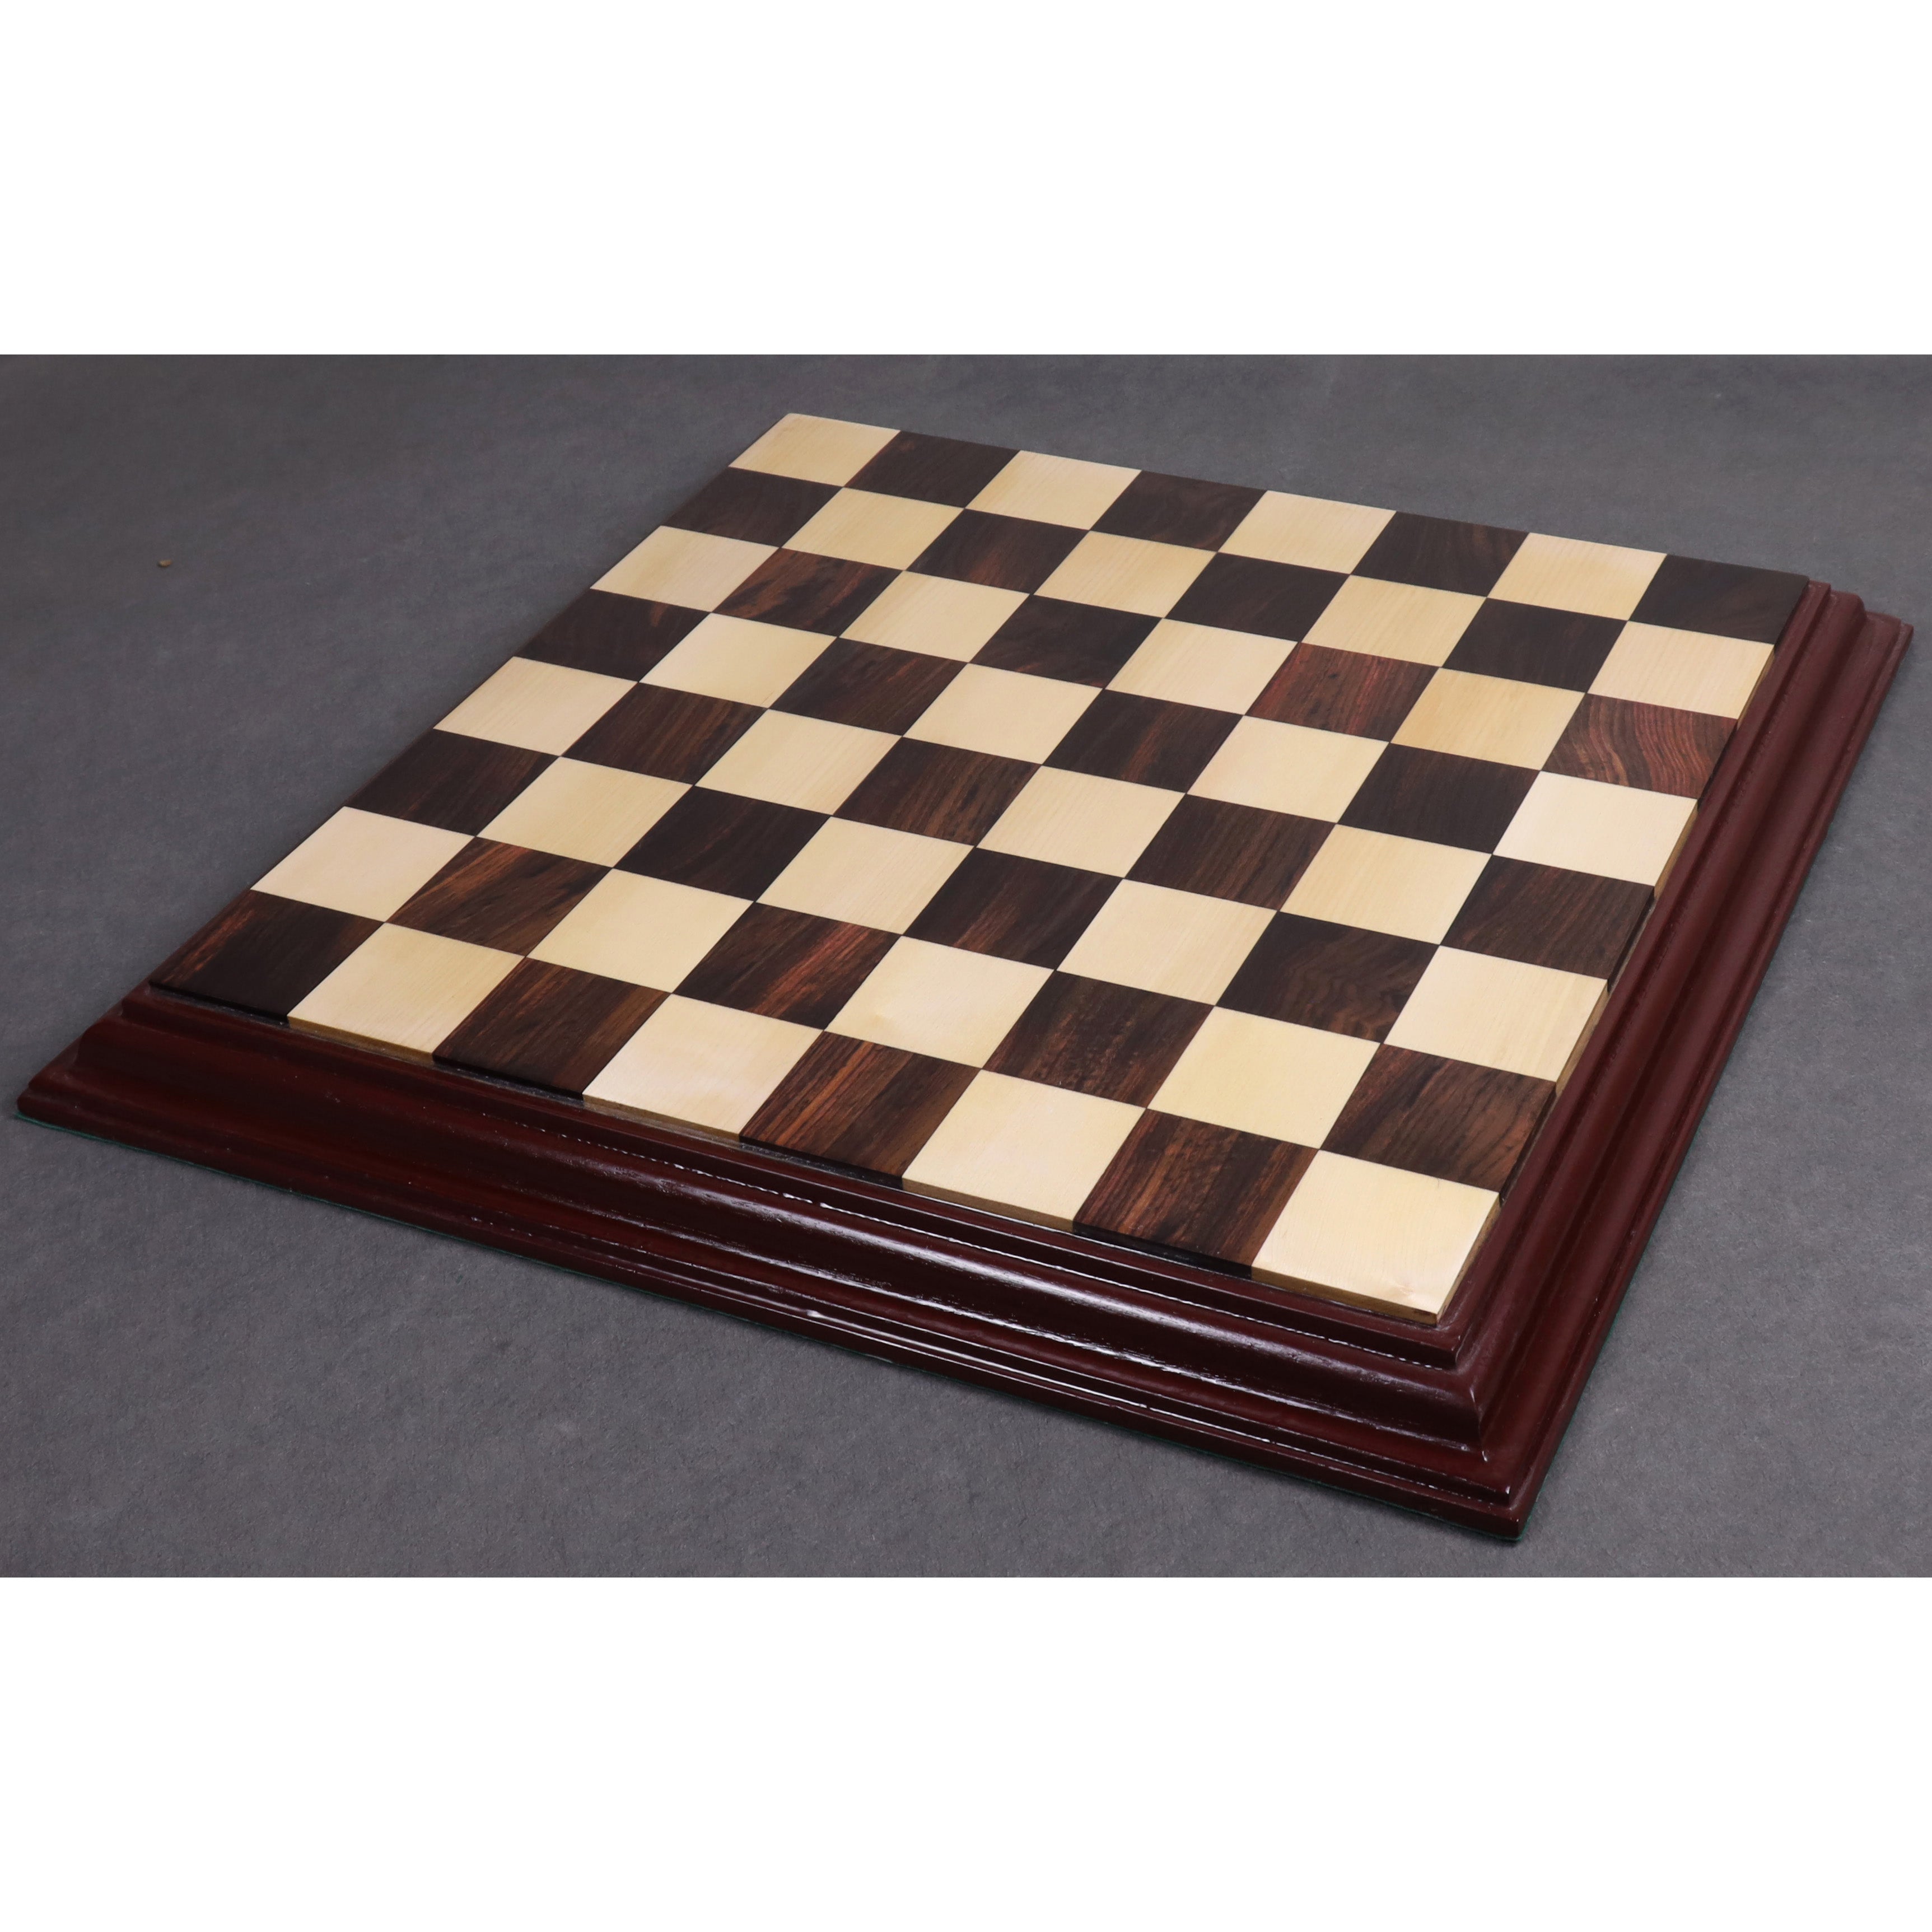 19.7” wooden chess board Belgrad with coordinates